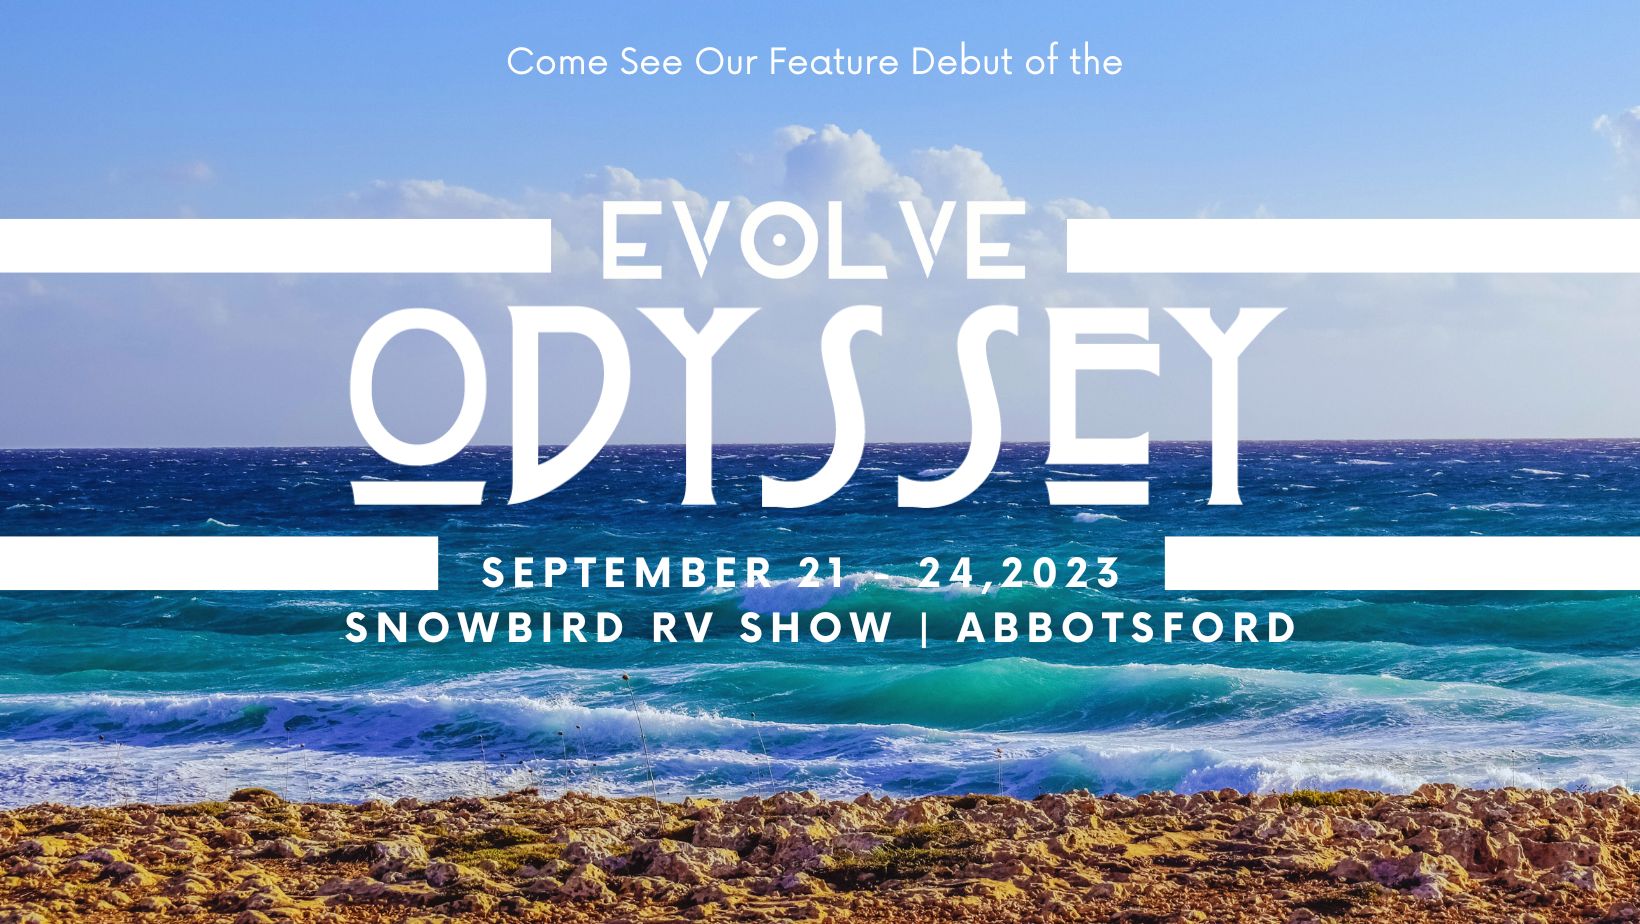 feature debut of odyssey